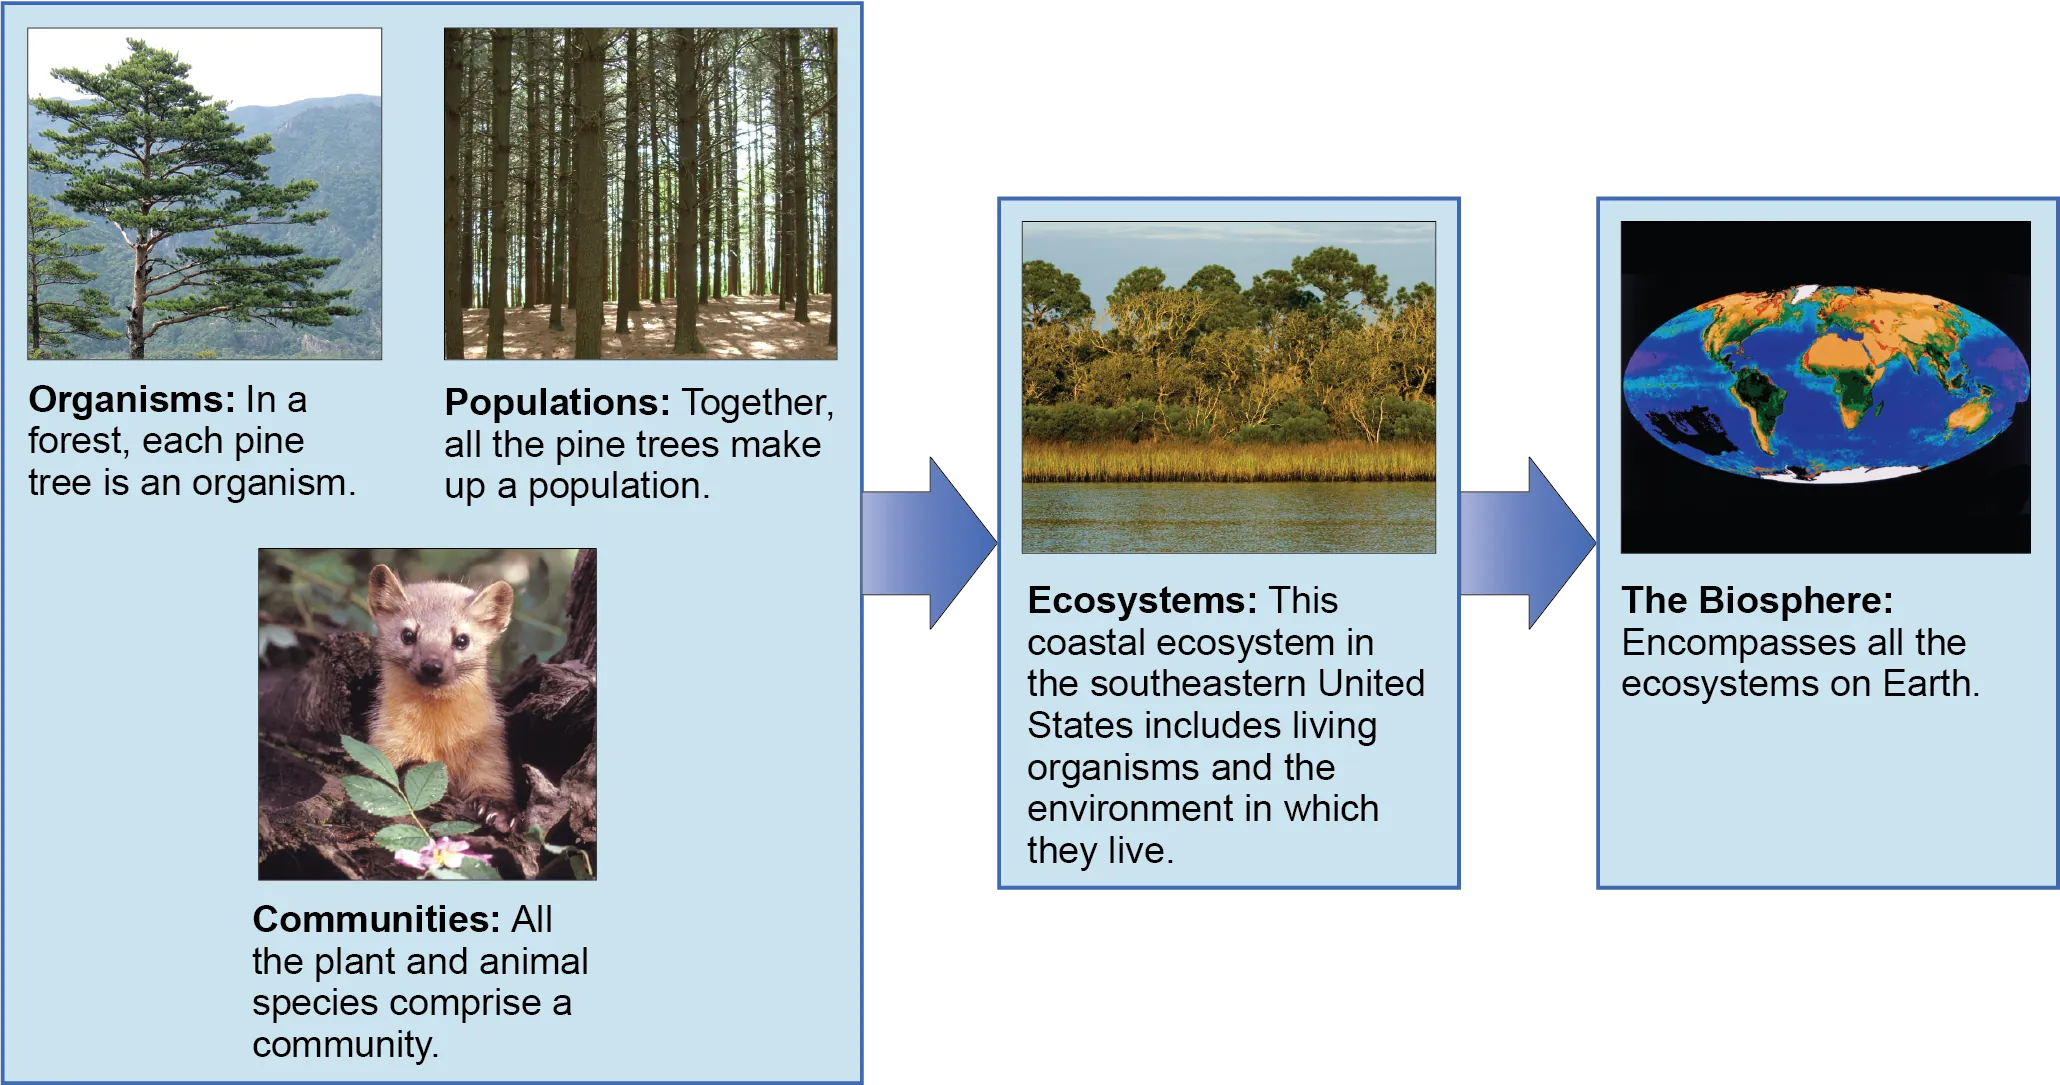 A flow chart of three boxes shows the hierarchy of living organisms. The top box is labeled Organisms, and a picture of a tree is shown; then populations, and a picture of a forest is shown; and then communities, and a picture of a marmot is shown. The second box is labeled ecosystems; and has a photograph of a body of water, behind which is a stand of tall grasses developing into more dense vegetation and trees as distance from the water increases. The third box is labeled as the biosphere; and shows a drawing of planet Earth.